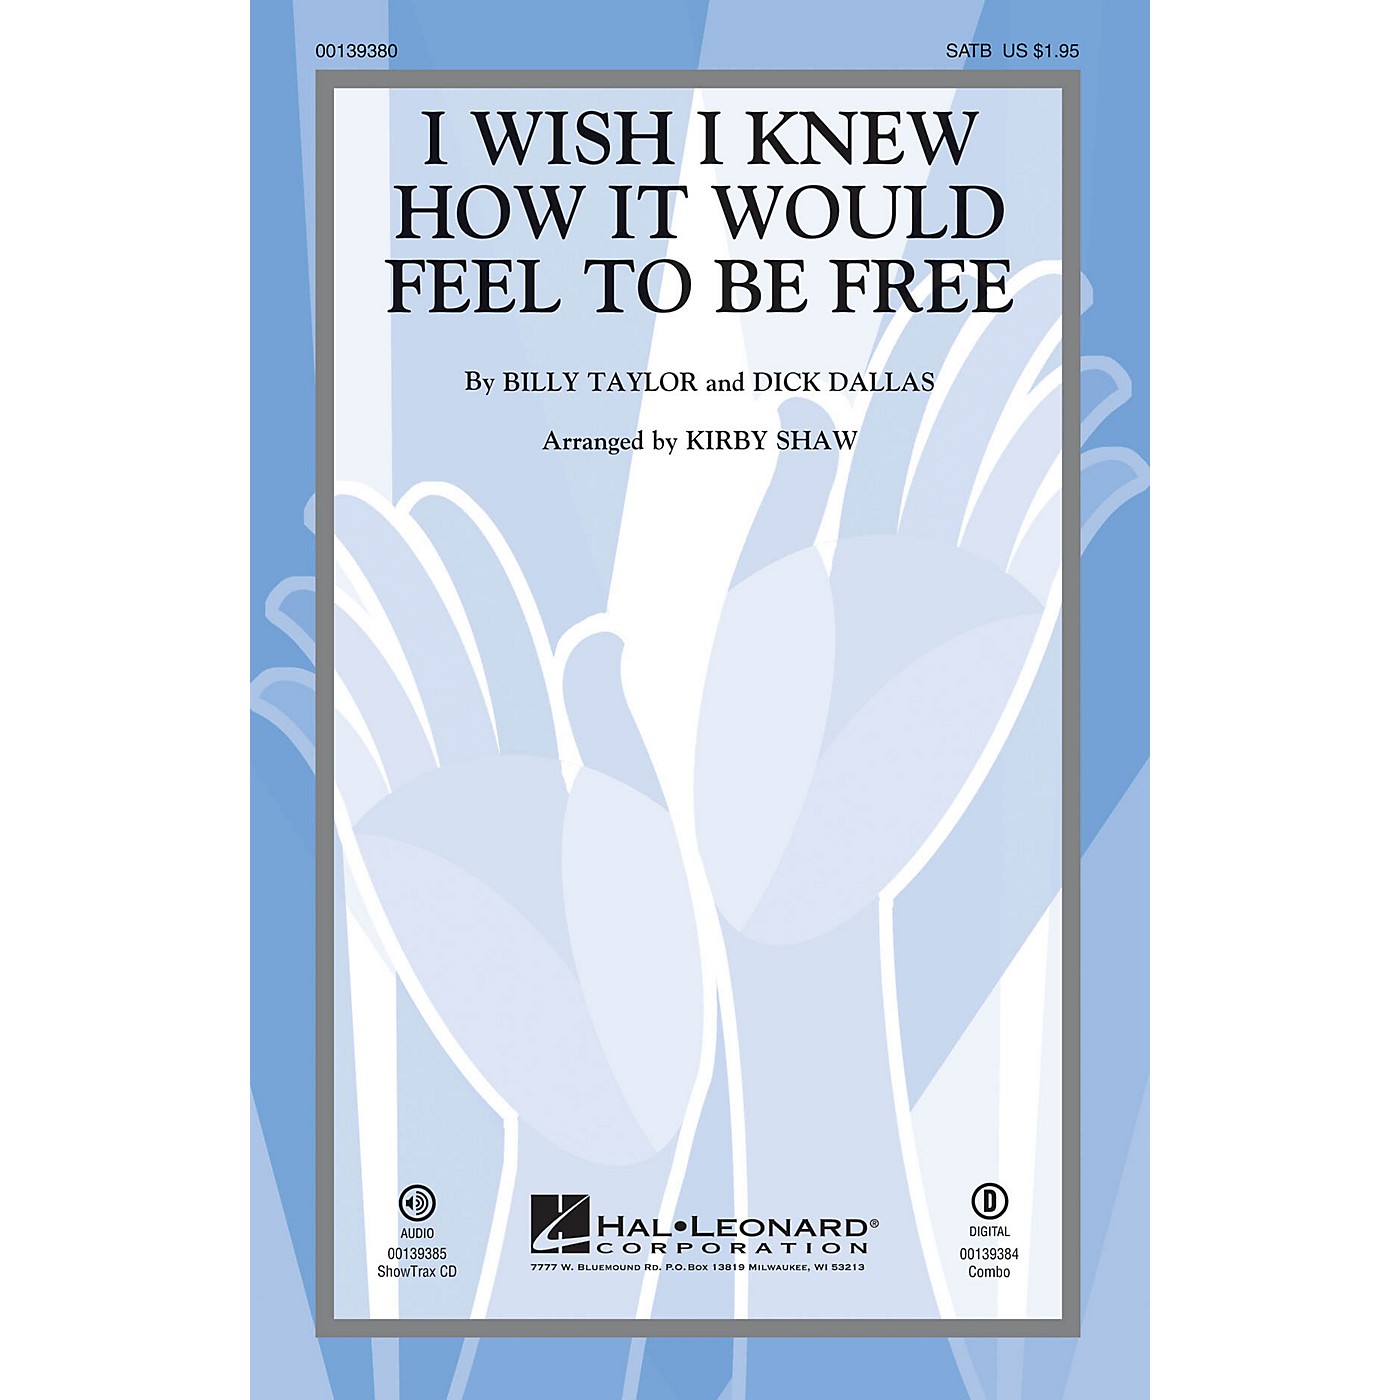 Hal Leonard I Wish I Knew How It Would Feel to be Free SATB by Billy Taylor arranged by Kirby Shaw thumbnail